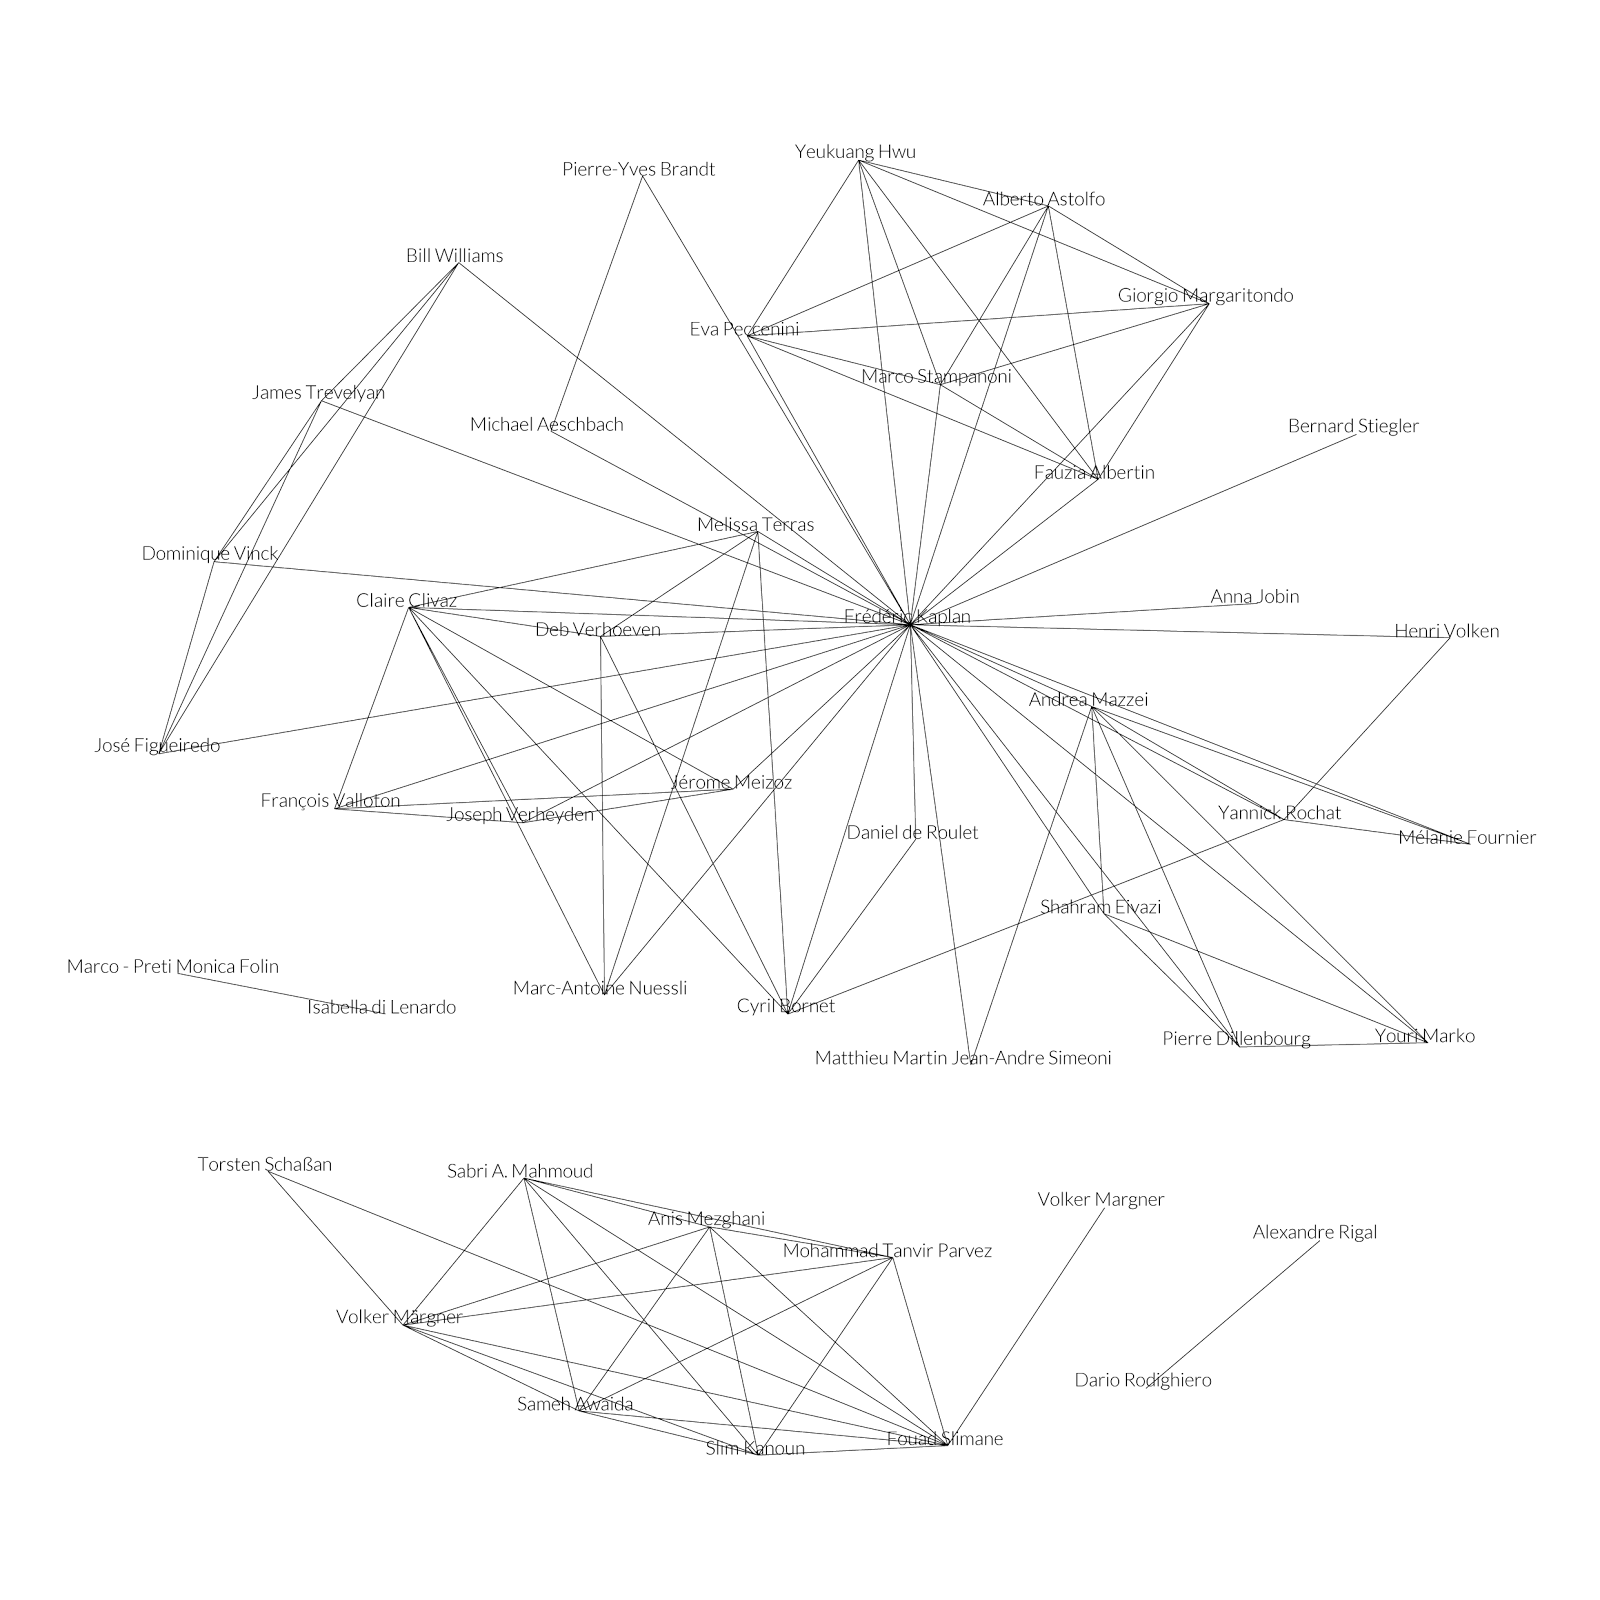 Figure 2. The DHLAB network is created by co-authoring: each node is an author and each edge a collaboration for a paper. Nodes represent also external collaborators